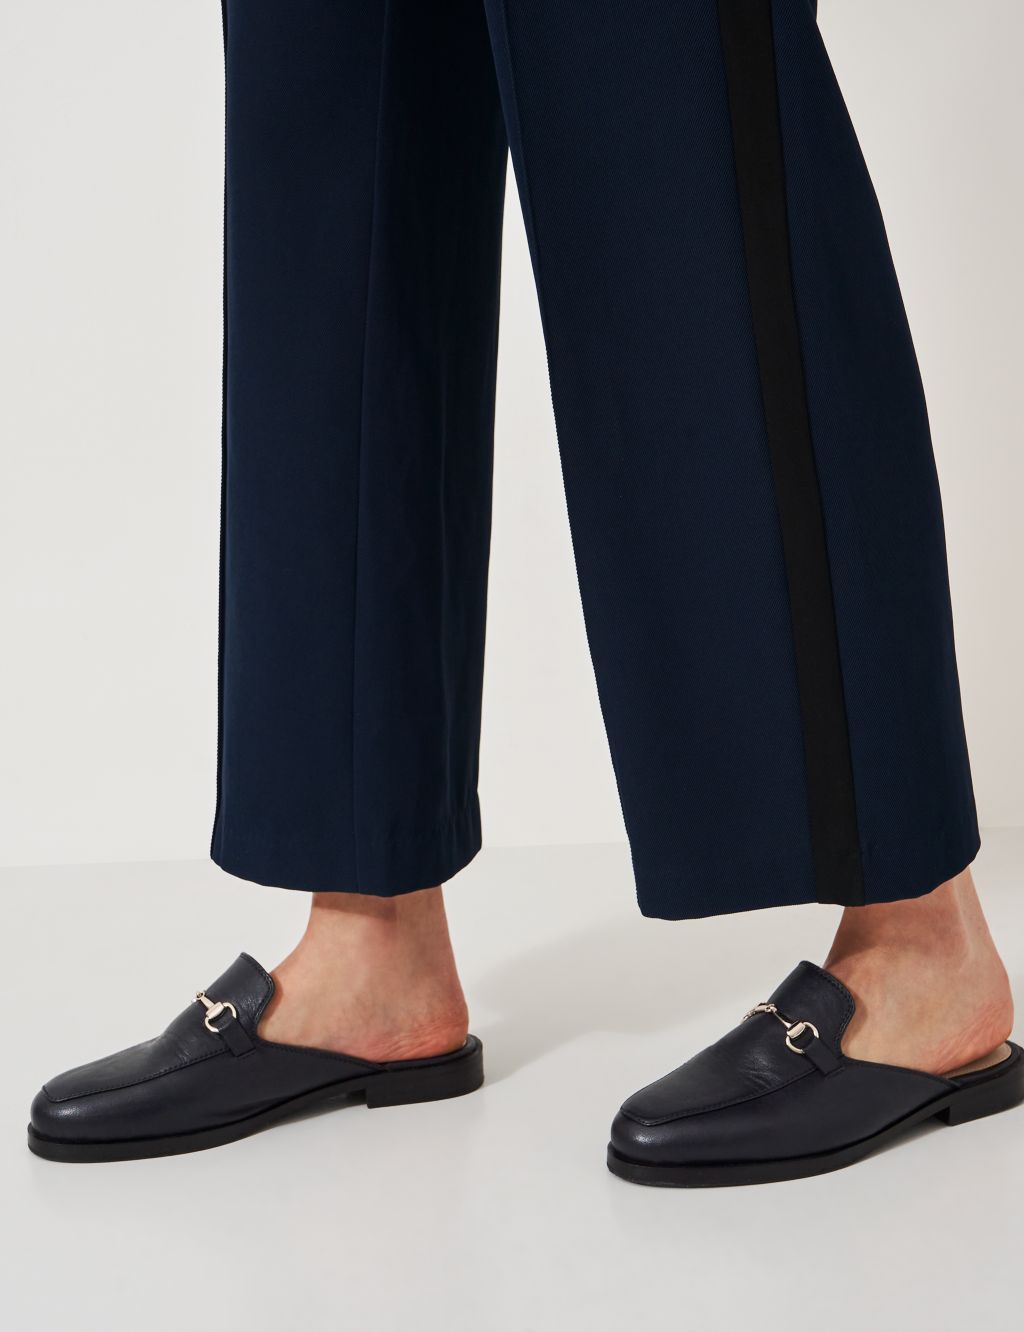 Leather Bar Mule Loafers